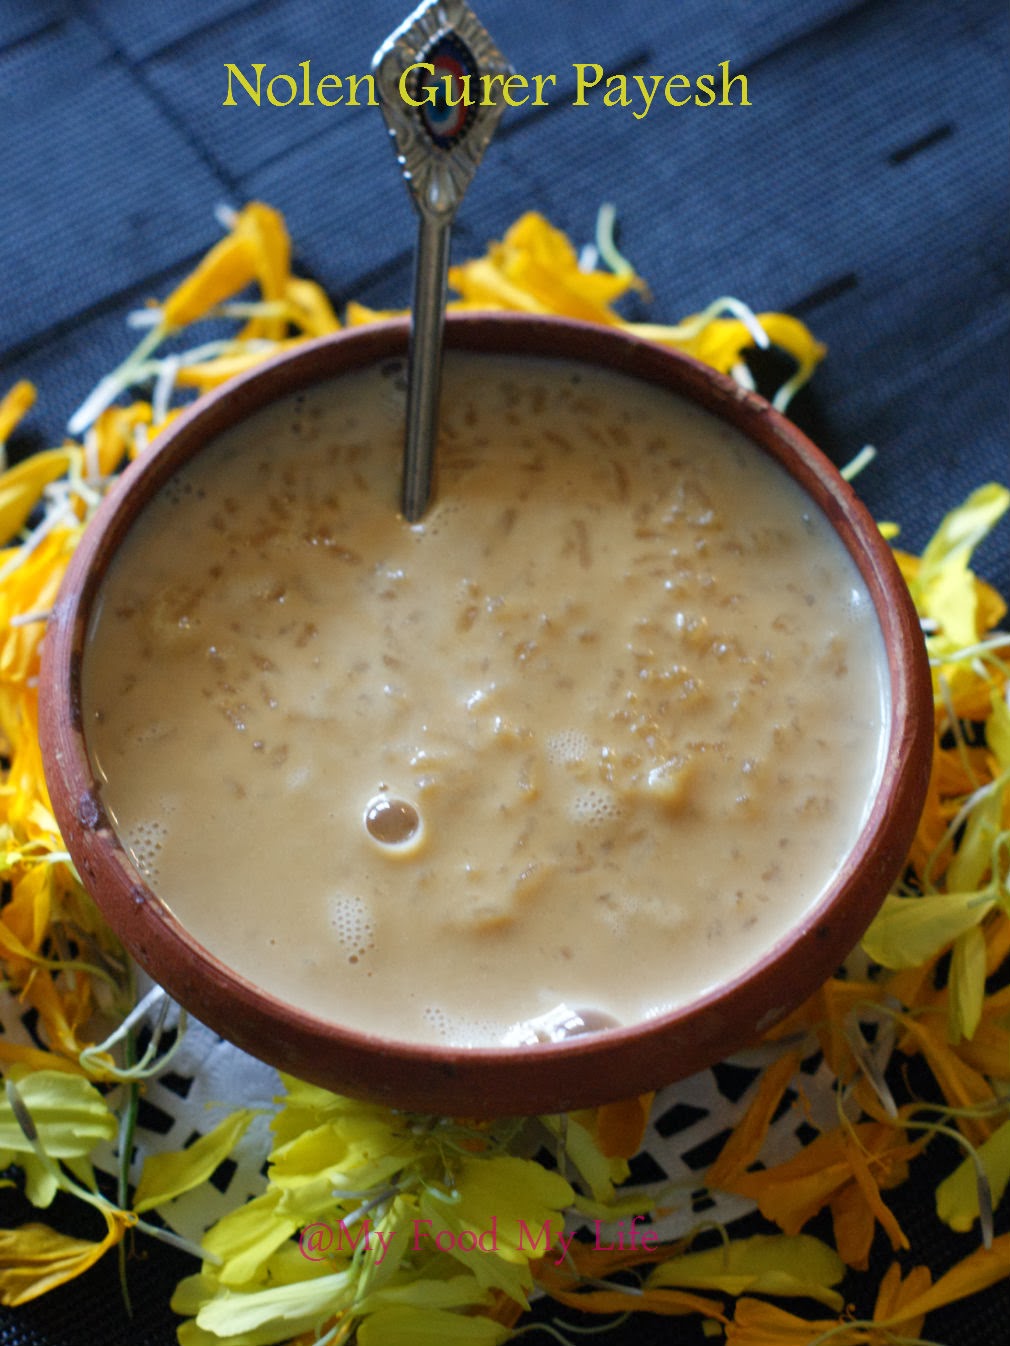 My Food My Life : Nolen Gurer Payesh ( Rice Pudding with Datepalm